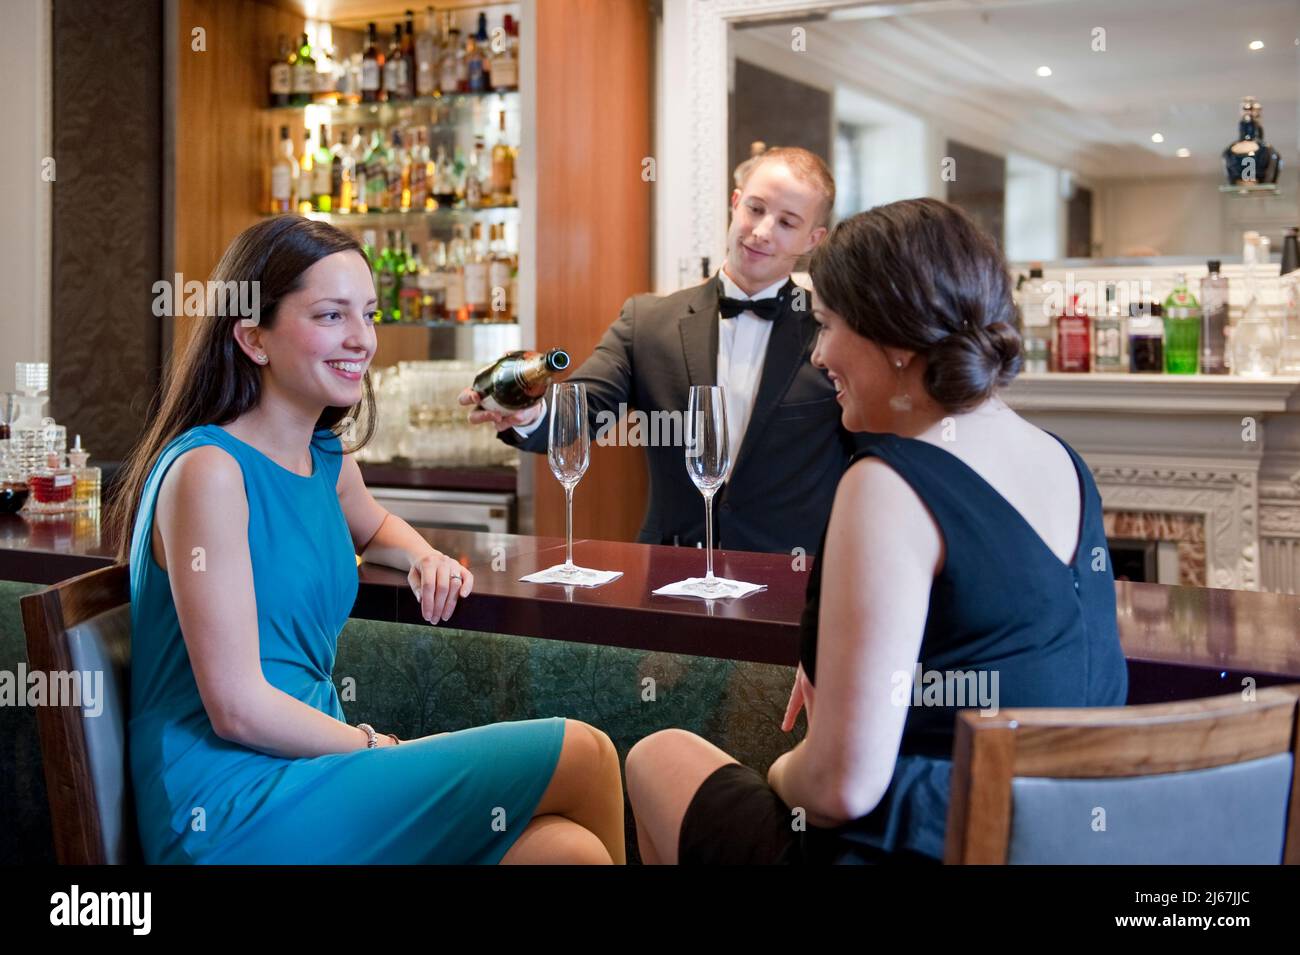 Your women talking at the bar counter with bartender serving cocktail. Stock Photo